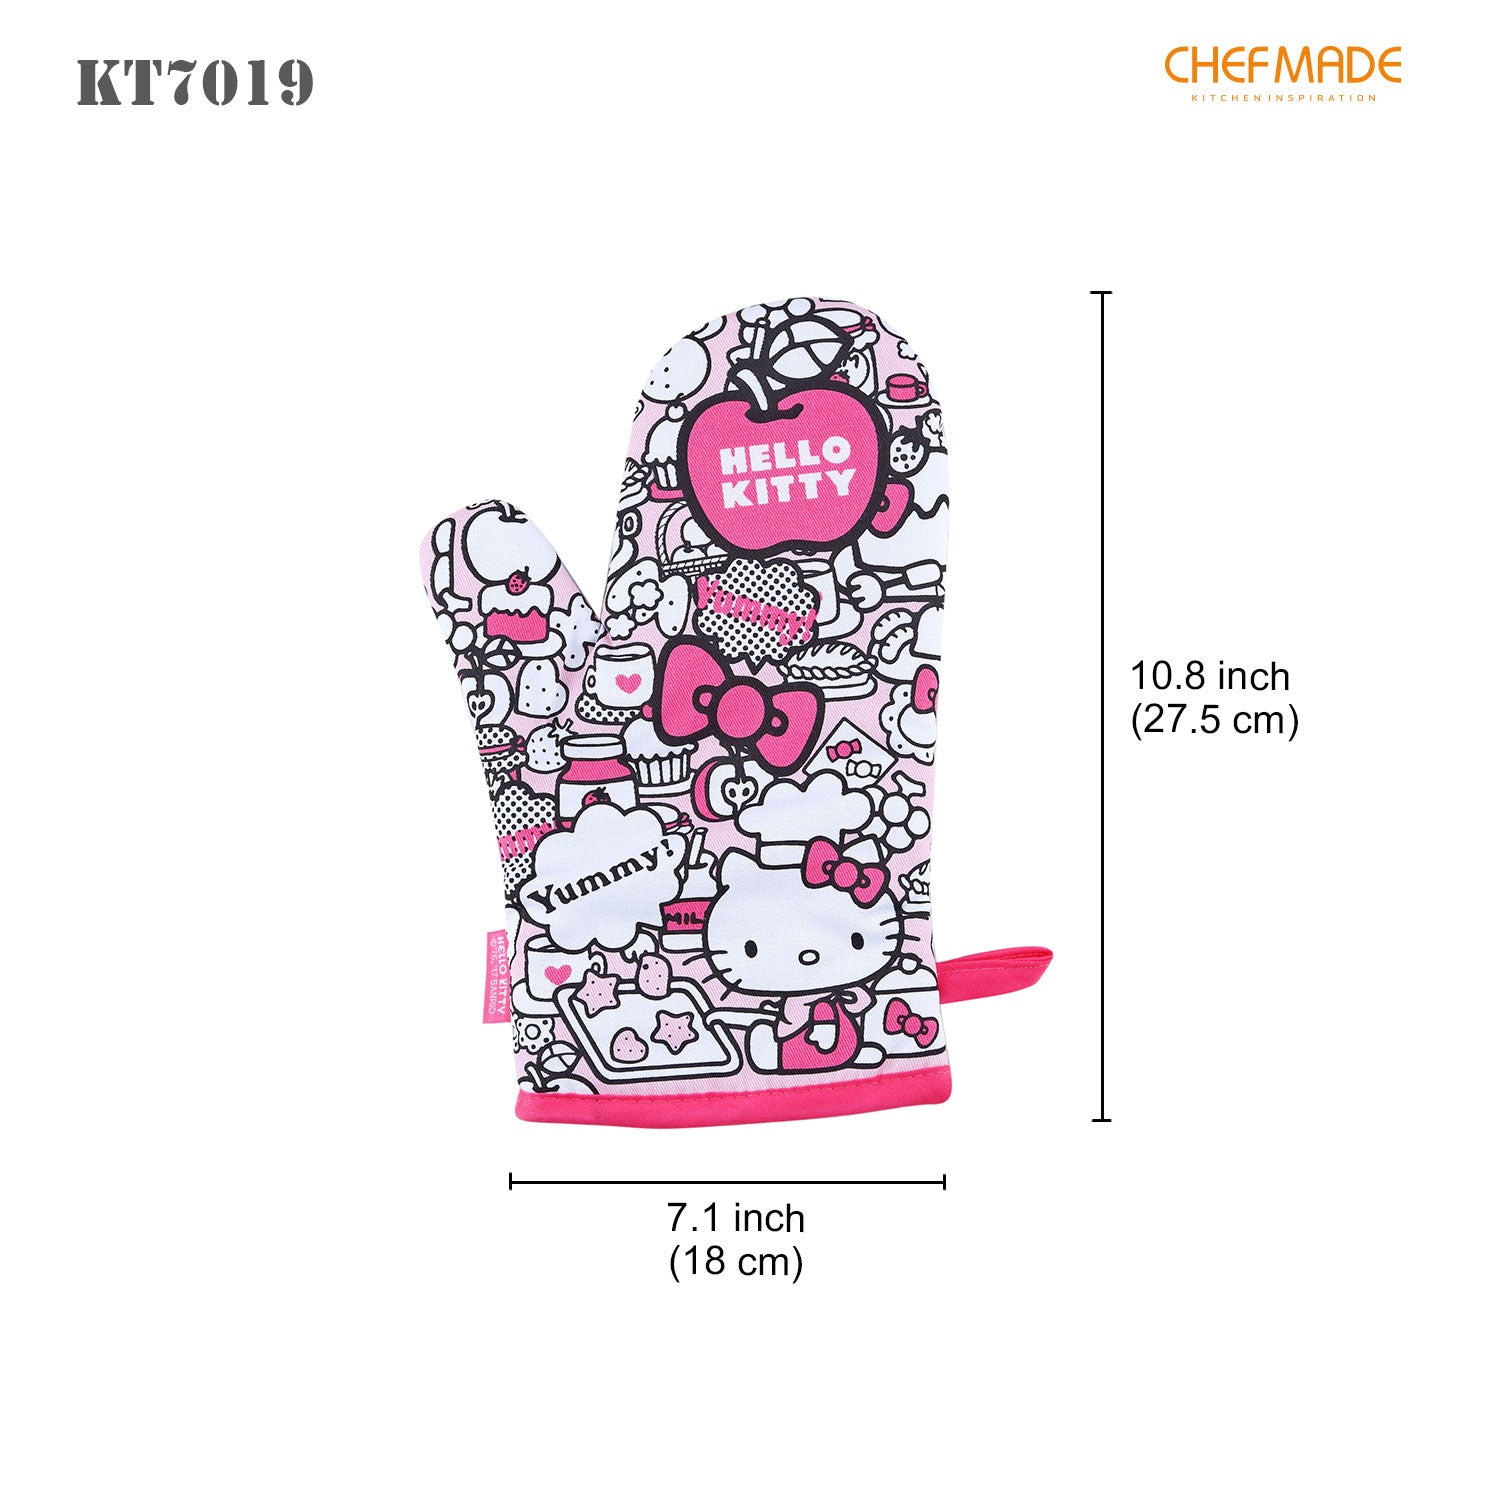 Made from Scratch Oven Mitt Funny Pet Cat Kittly Lover Graphic Novelty Kitchen Glove (Oven Mitt)